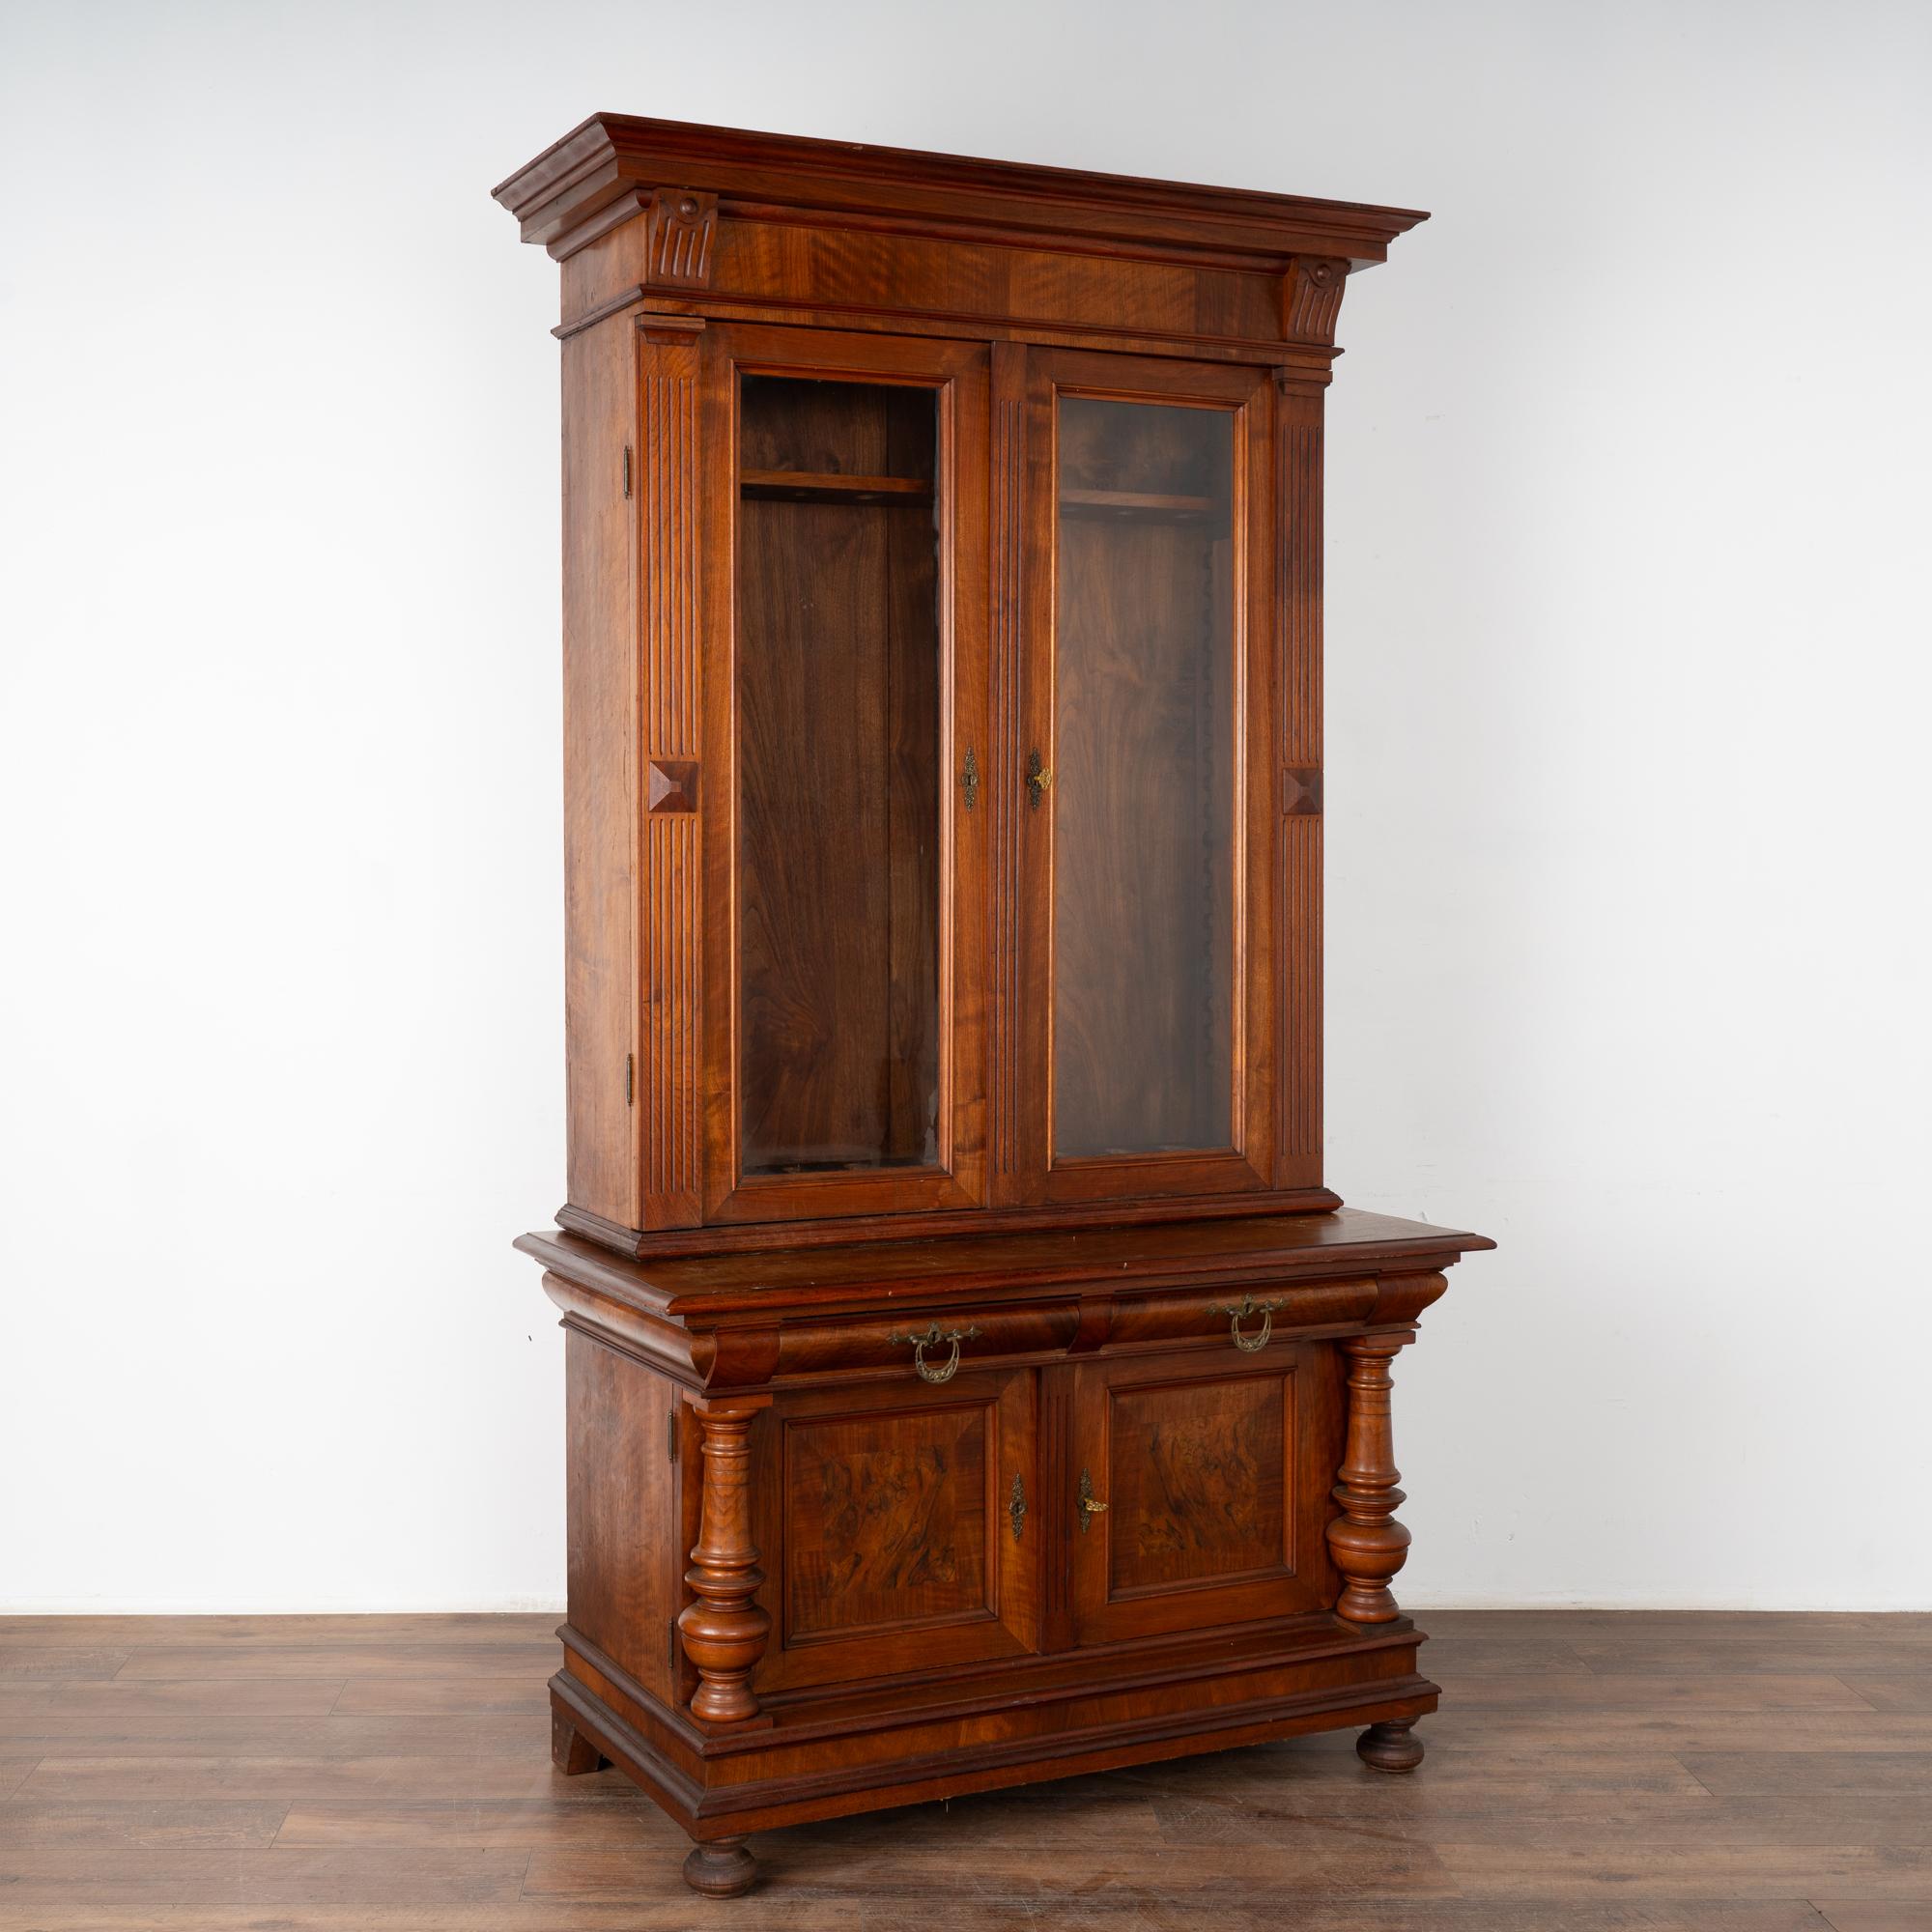 Striking walnut gun cabinet with attractive fluted carving and turned columns. Holds 9 guns and stands 7.5' tall.
Lower cabinet has two drawers over two doors, which open to reveal 4 interior central drawers.
Locks no longer function. 2 keys